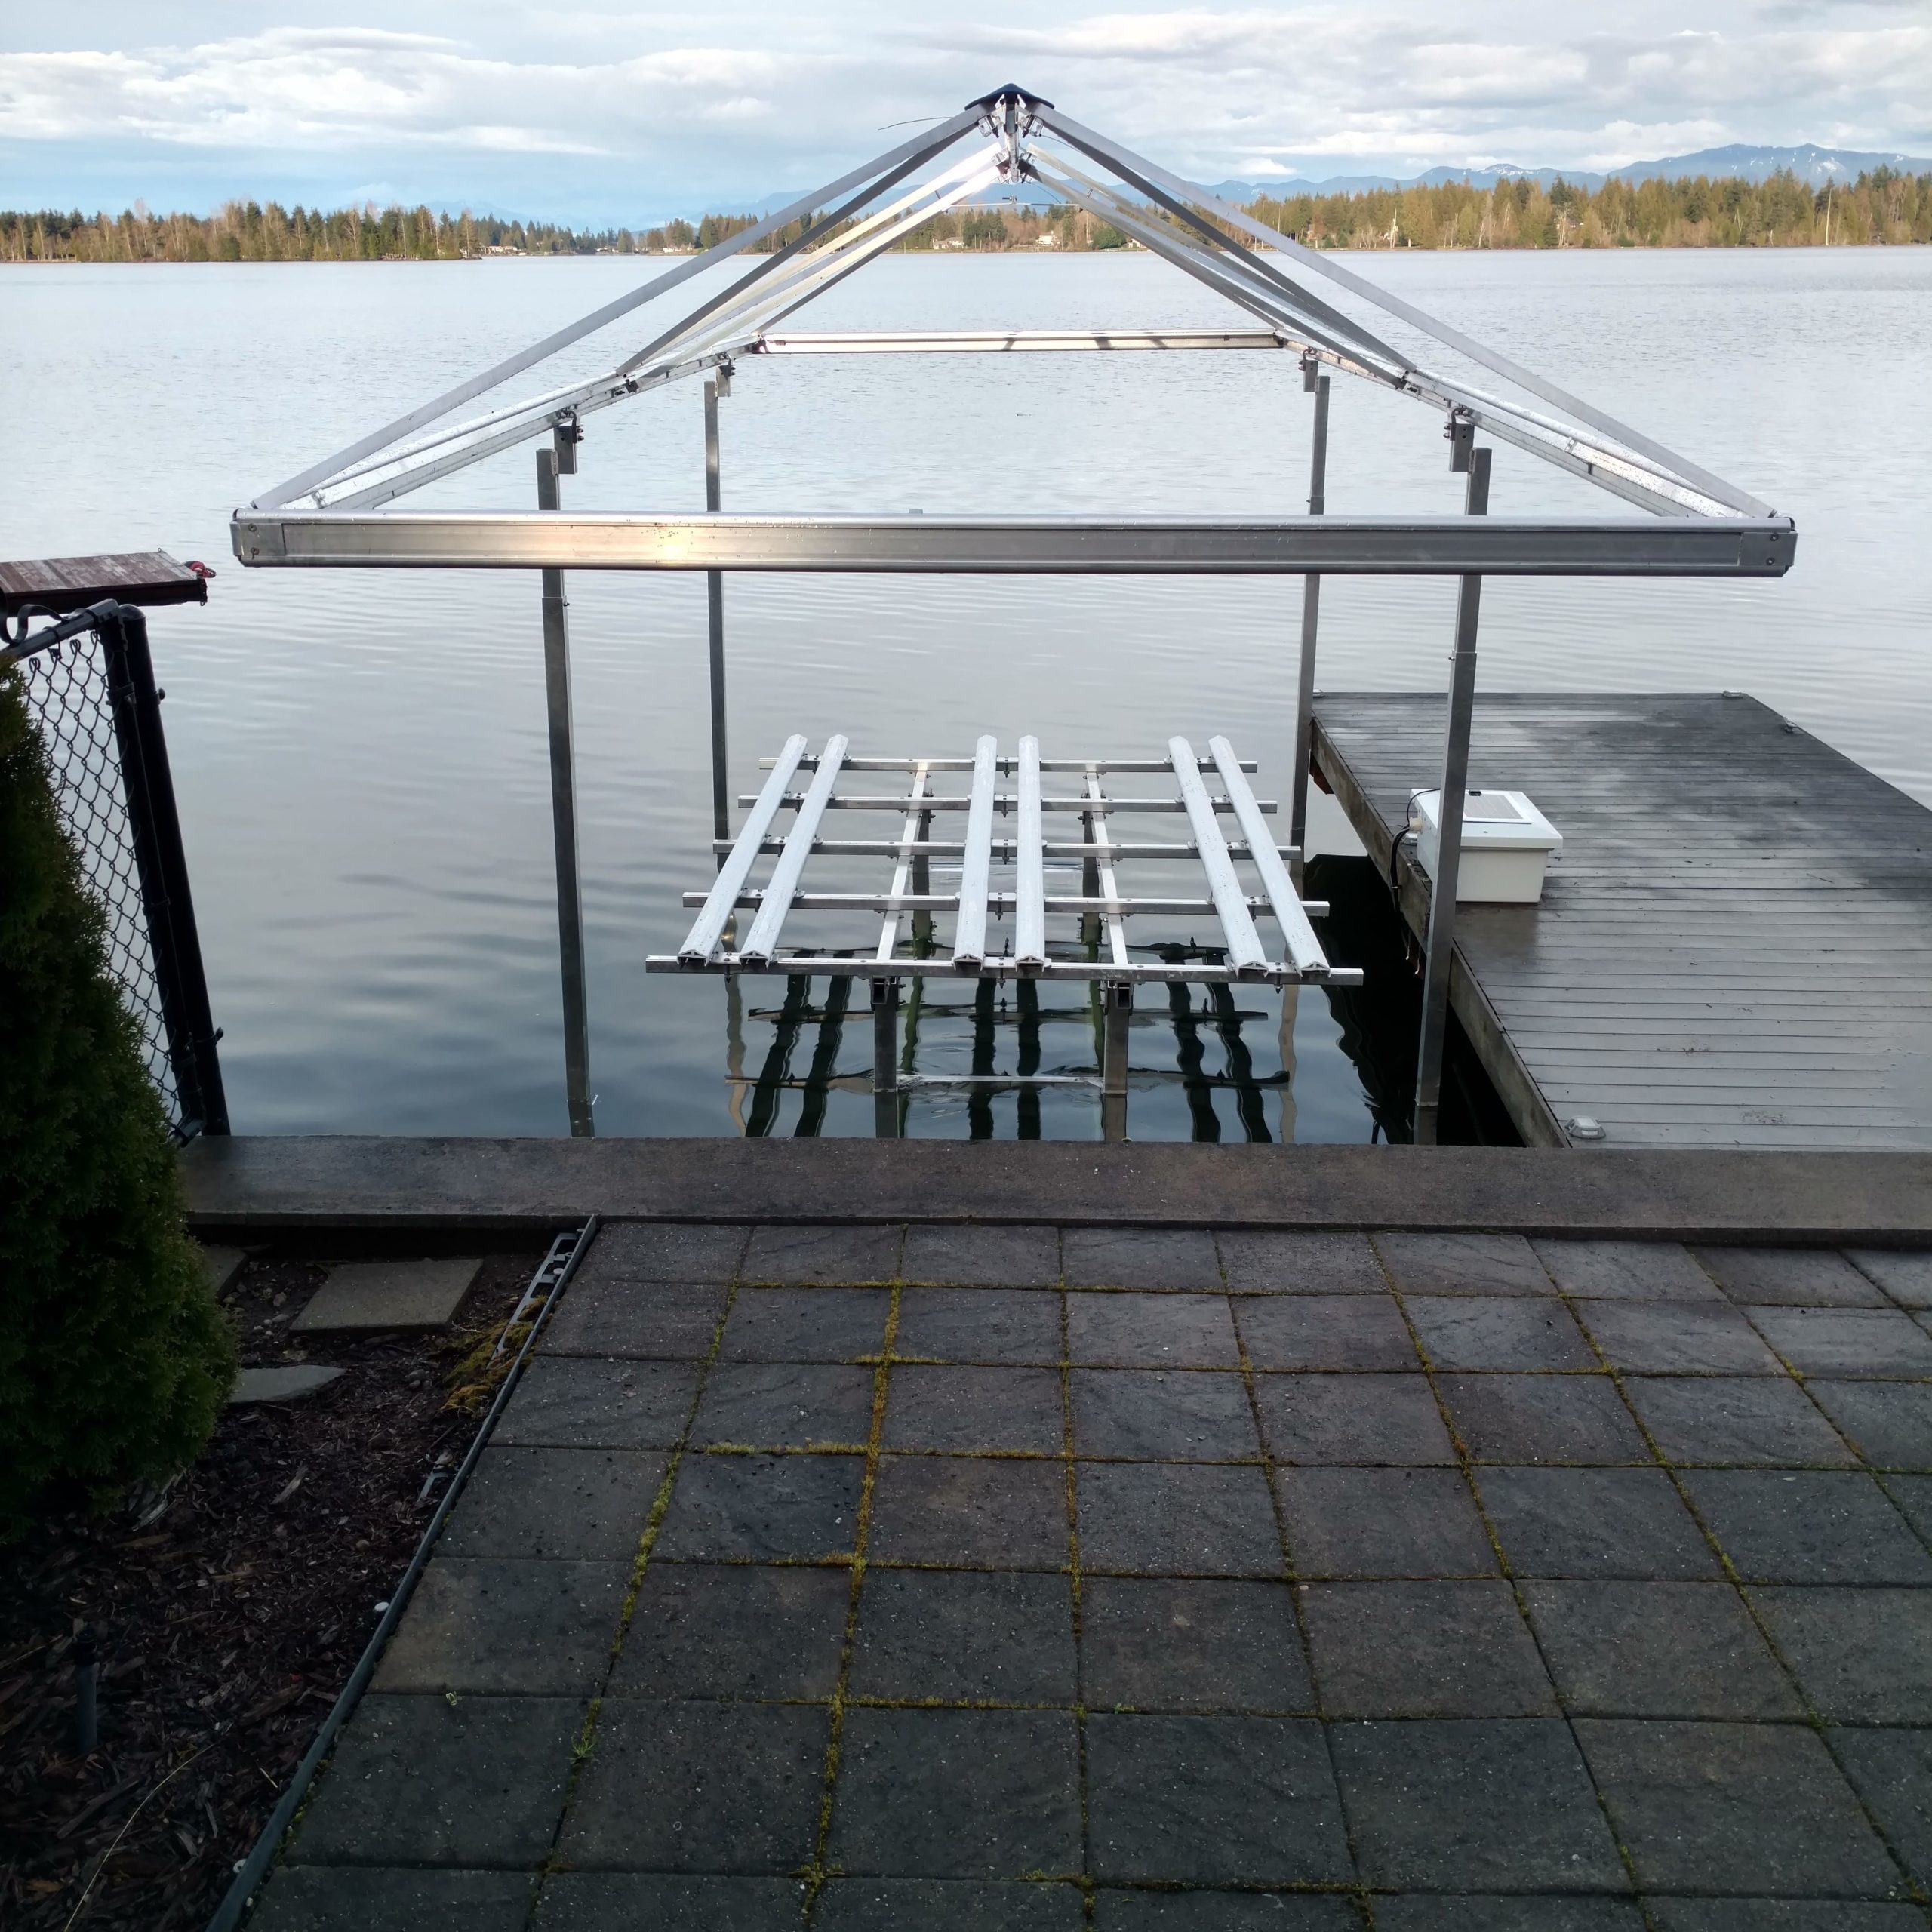 A pontoon boat lift floating or installed above the sea, designed for convenient storage and access to boats.